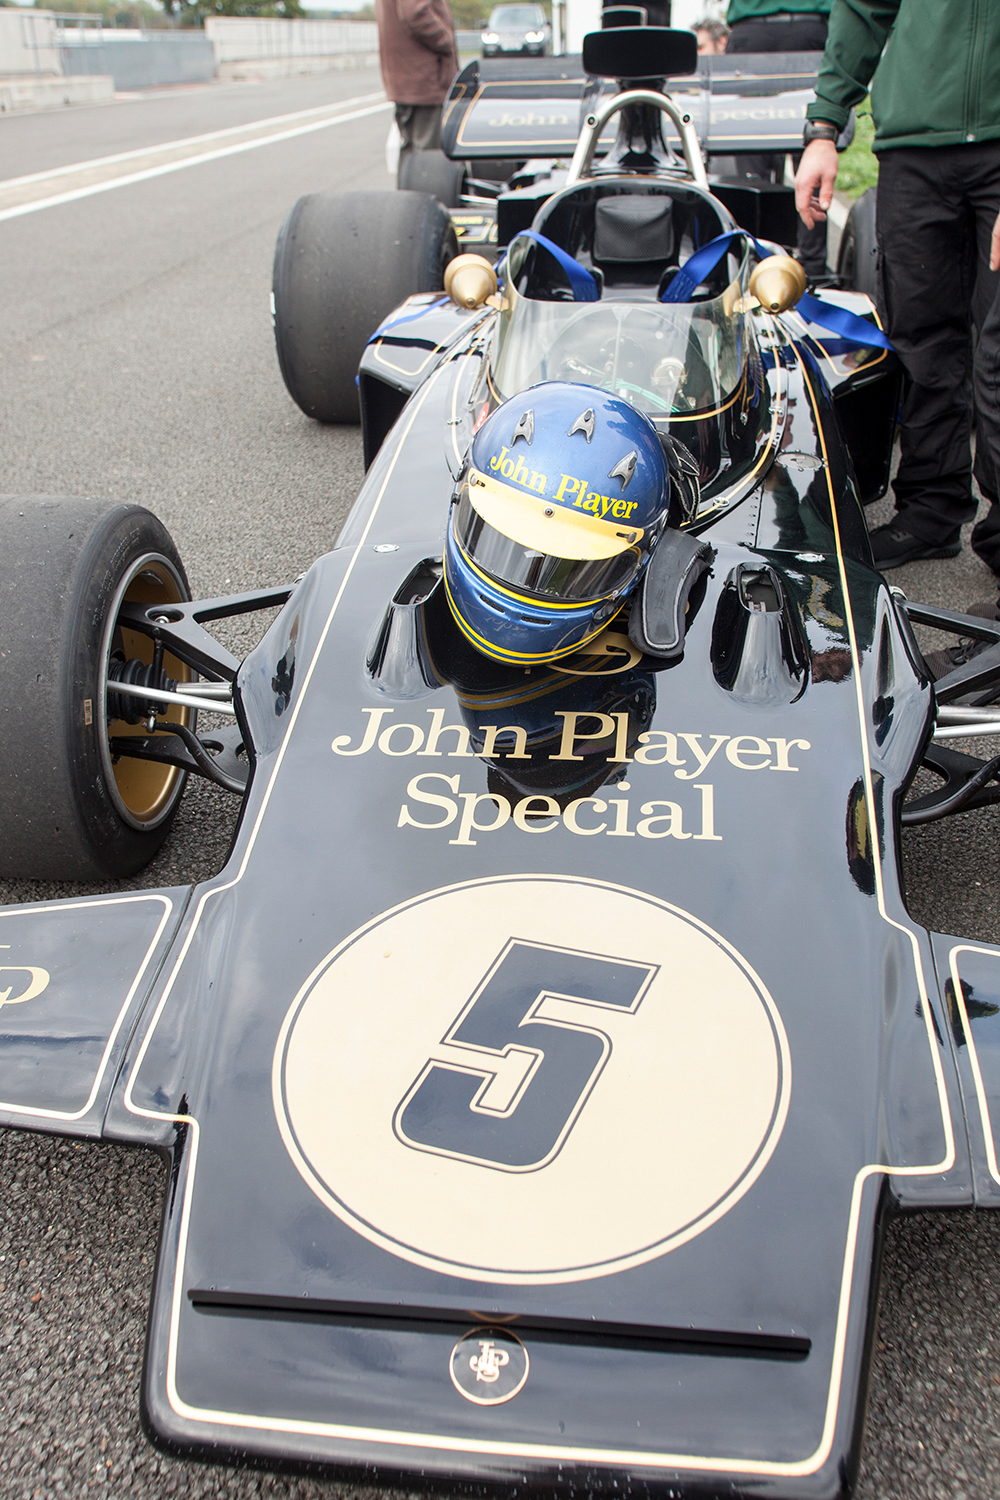 Hommage to Ronnie Peterson, also Emerson’s winningest chassis #72/7. Roger Dixon